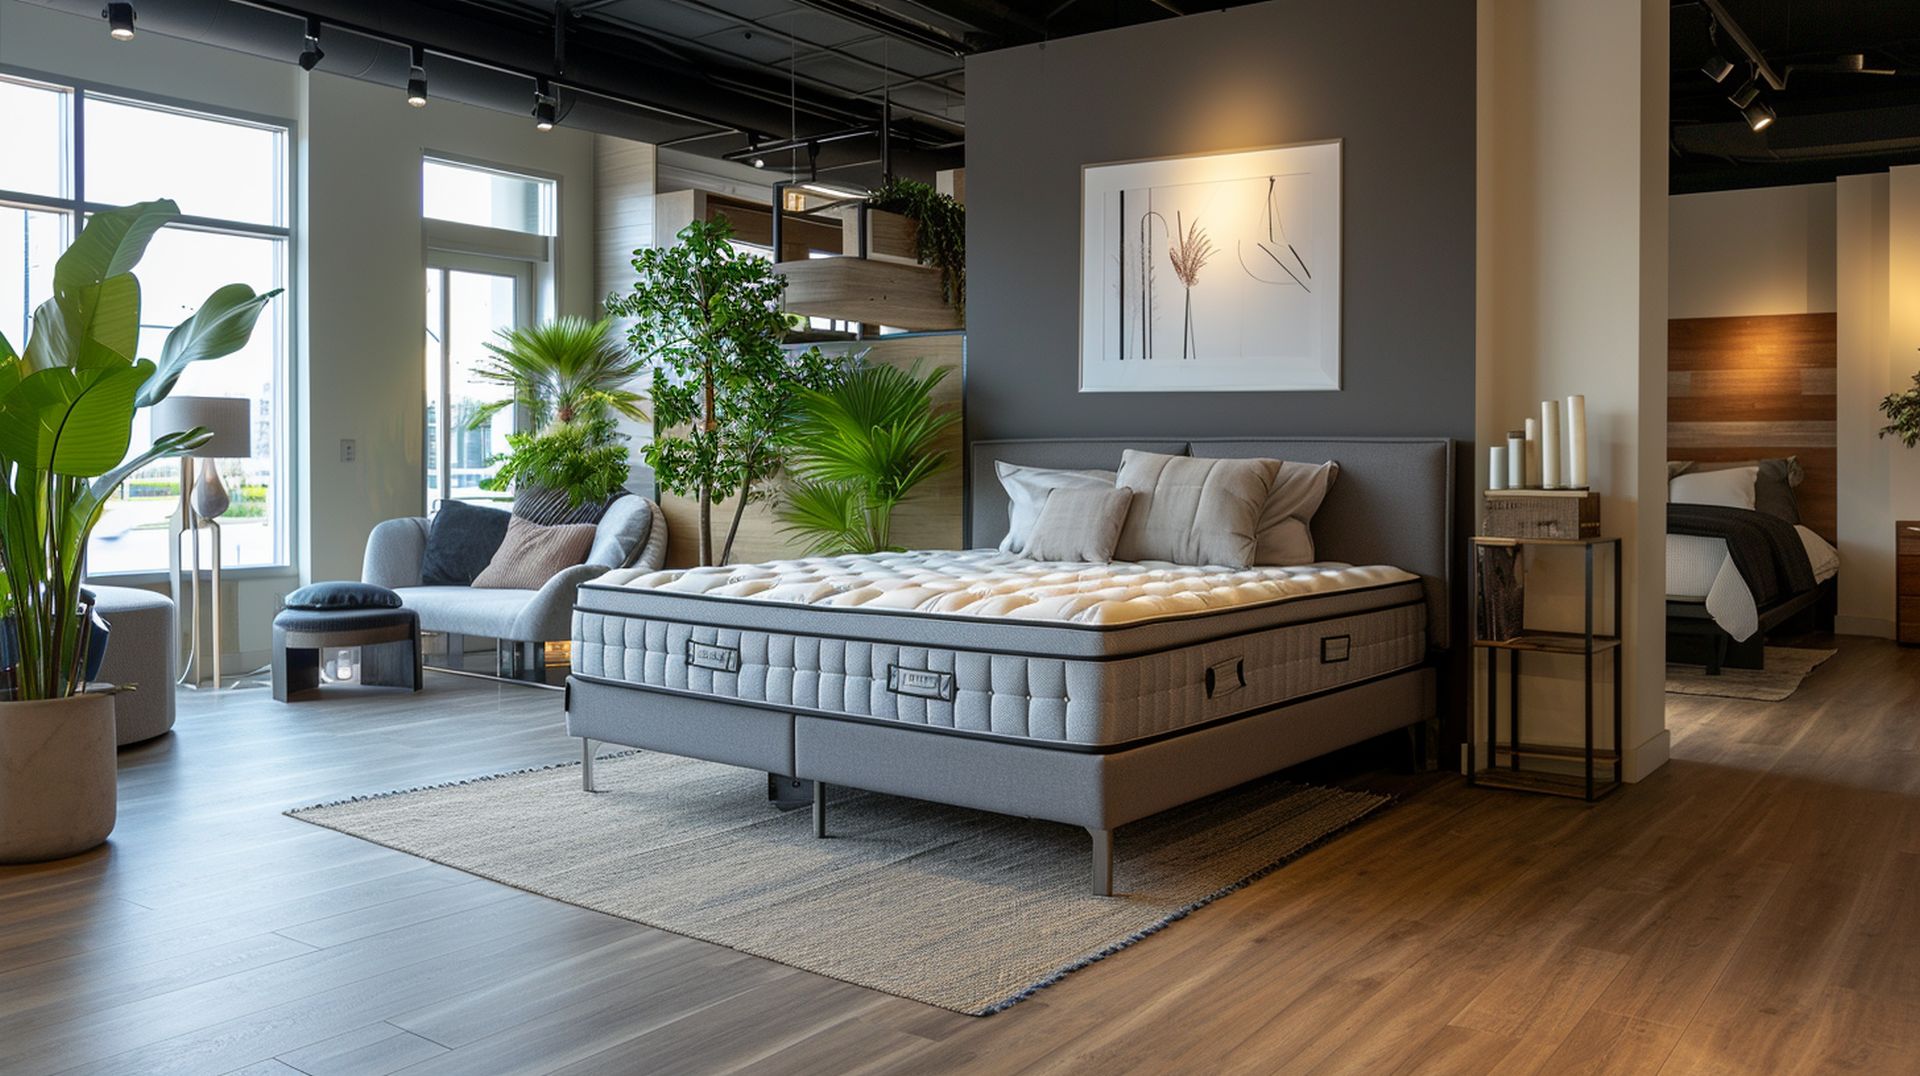 If you're looking for a new bed, mattress stores in Pasco offer the best customer and delivery service, financing, and warranties in Washington